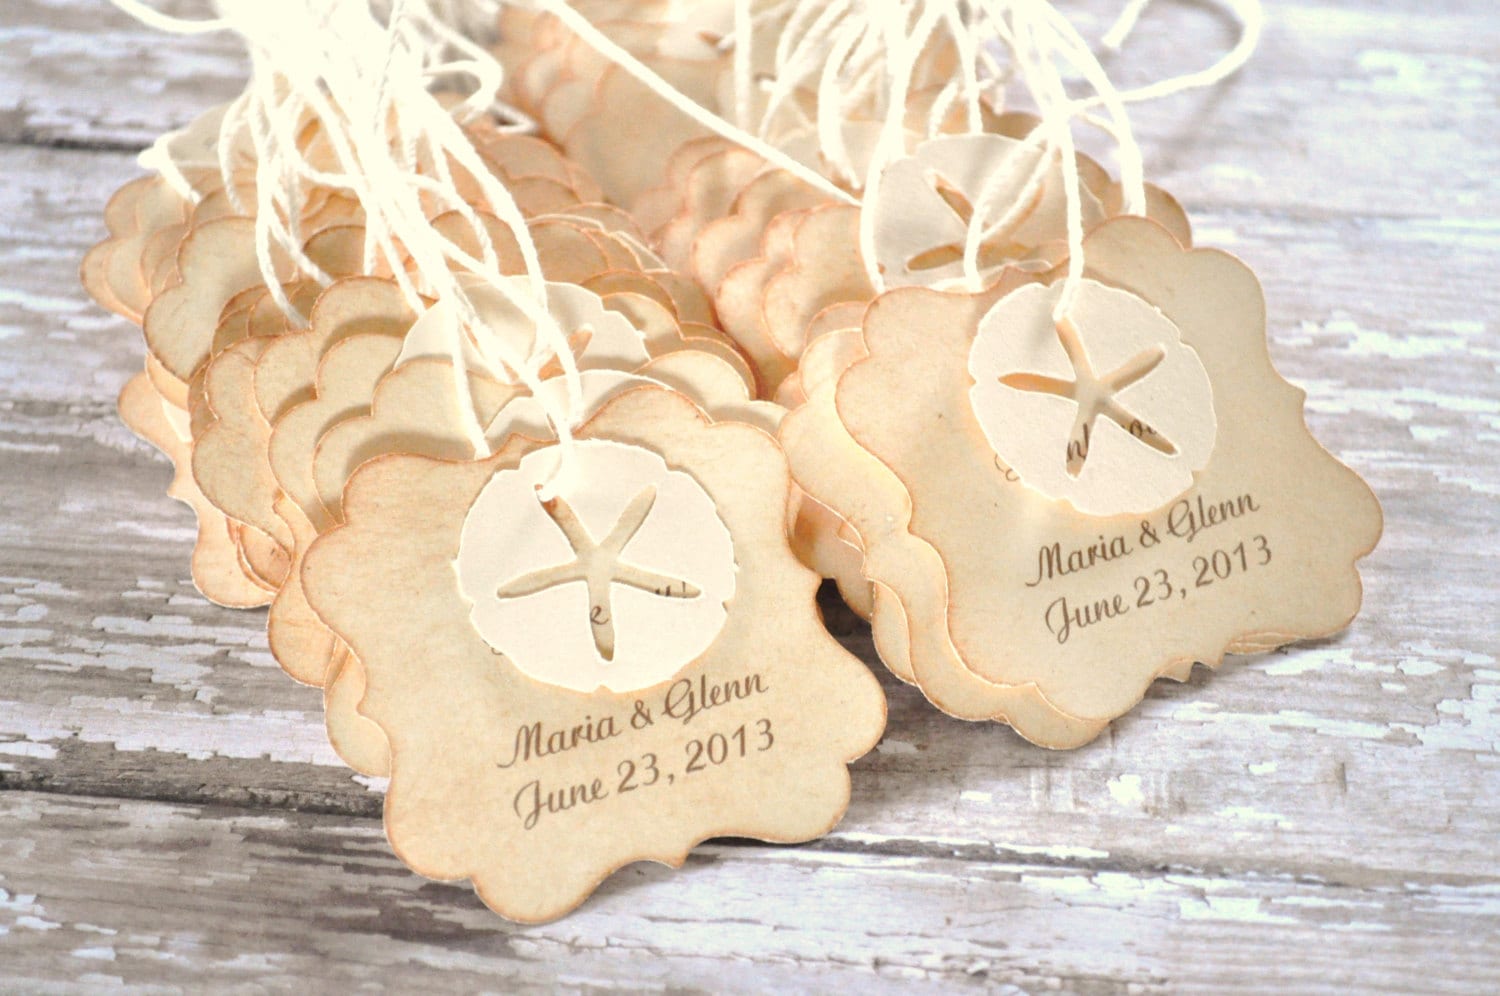 This is a set of 48 wedding favor tags. They measure approx. 2x2 inches. They are perfect for your beach theme wedding. They feature your names and wedding date